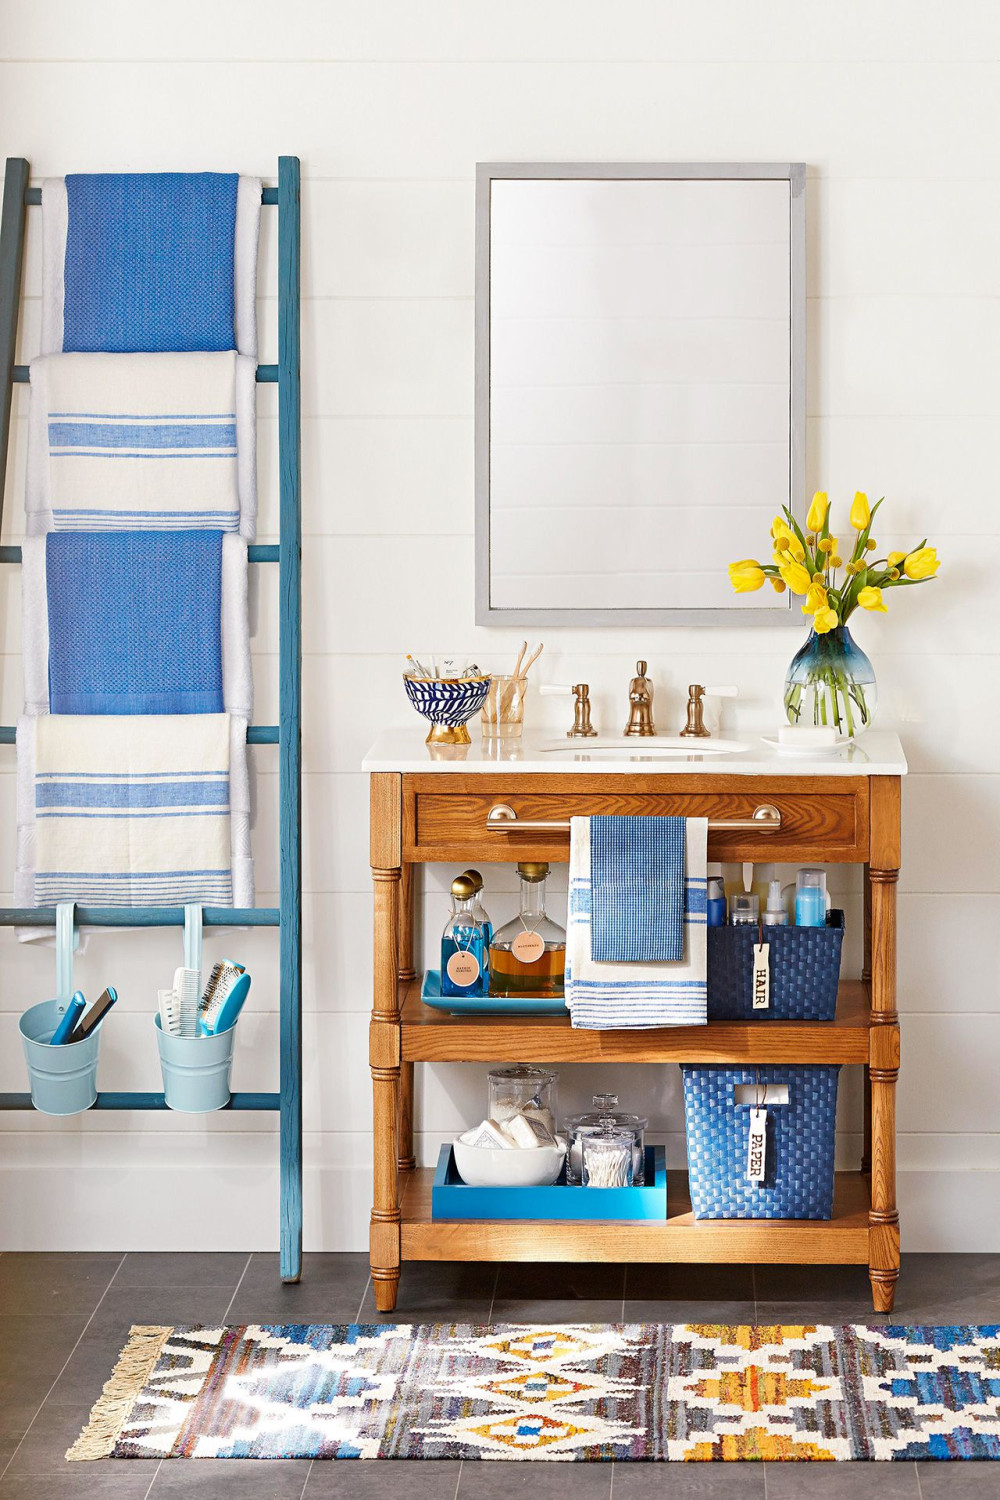 Bathroom Towel Storage Ideas That Are Pretty and Practical